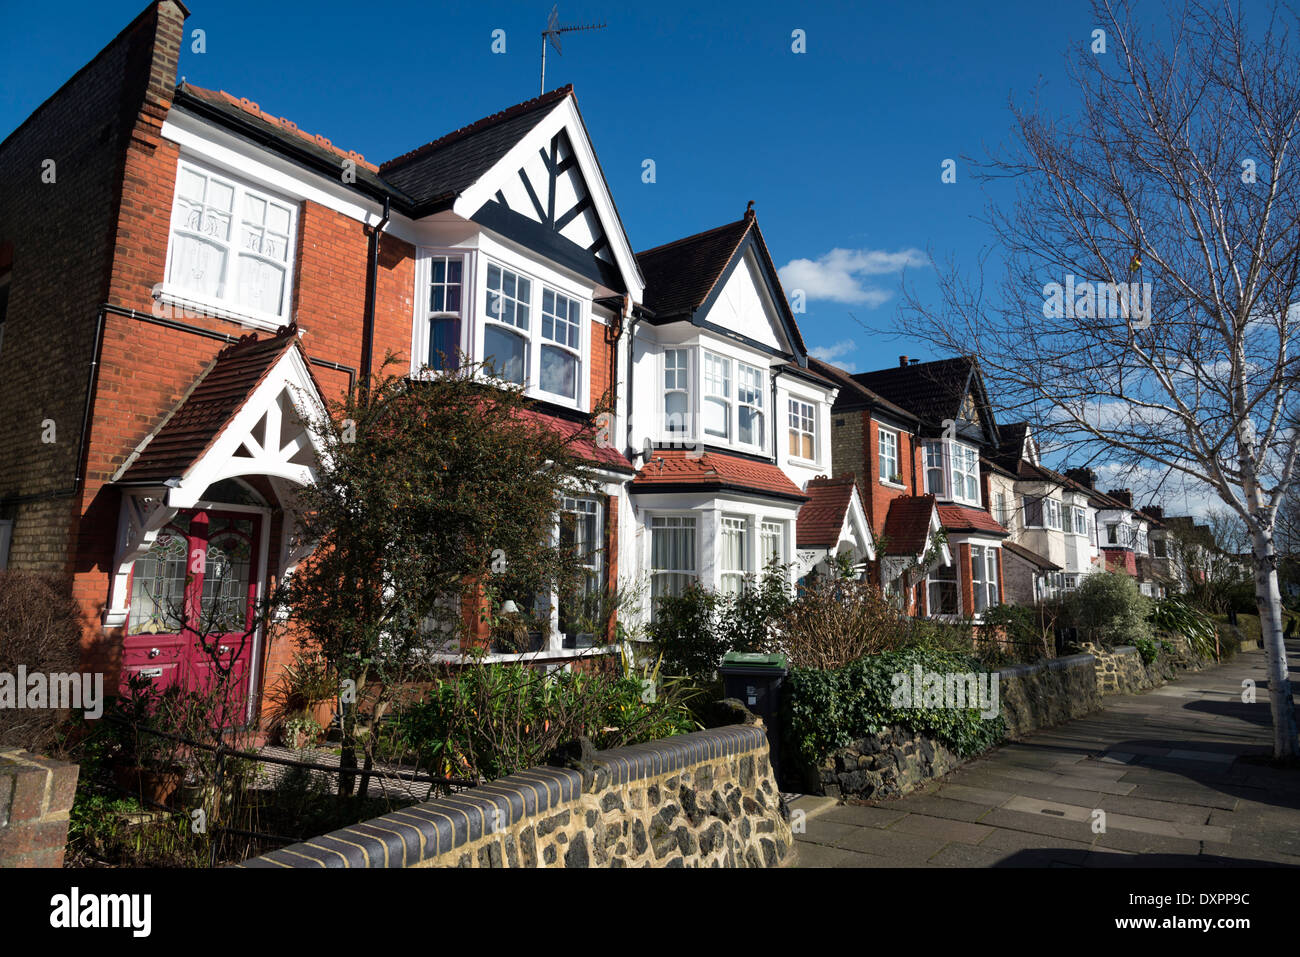 Row of houses in Farrer Road, Hornsey, North London, England, UK Stock Photo